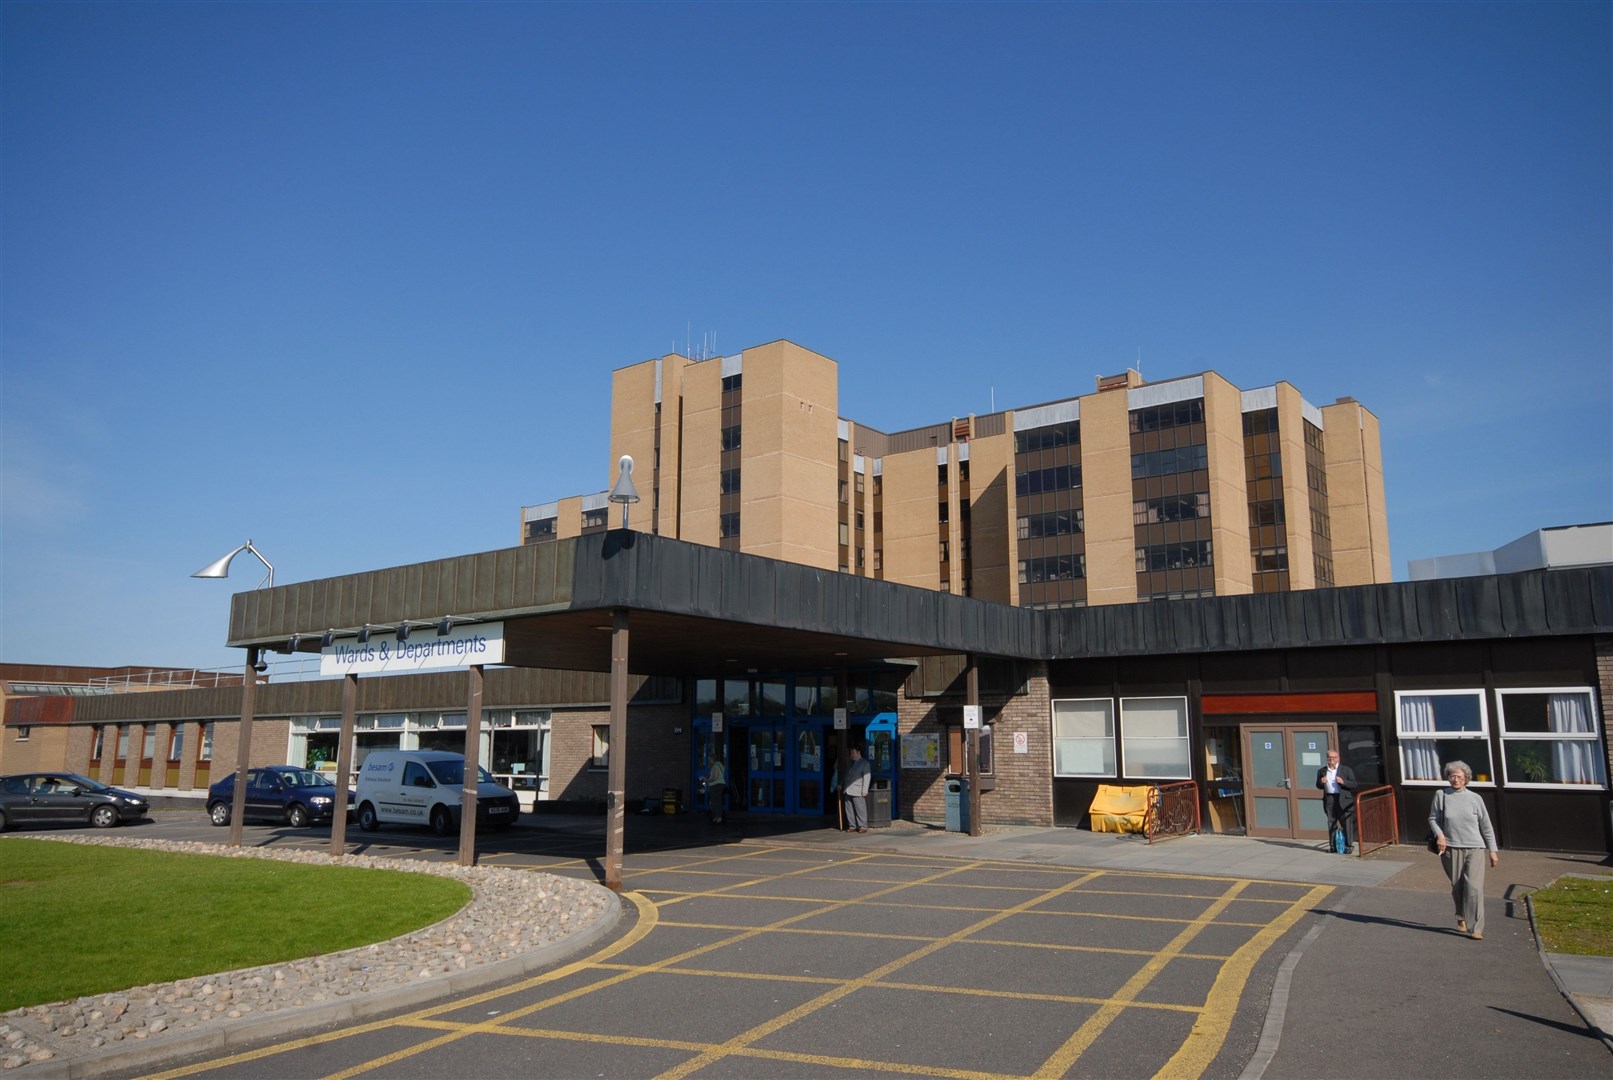 Raigmore Hiospital is to receive extra cash to address waiting times difficulties.